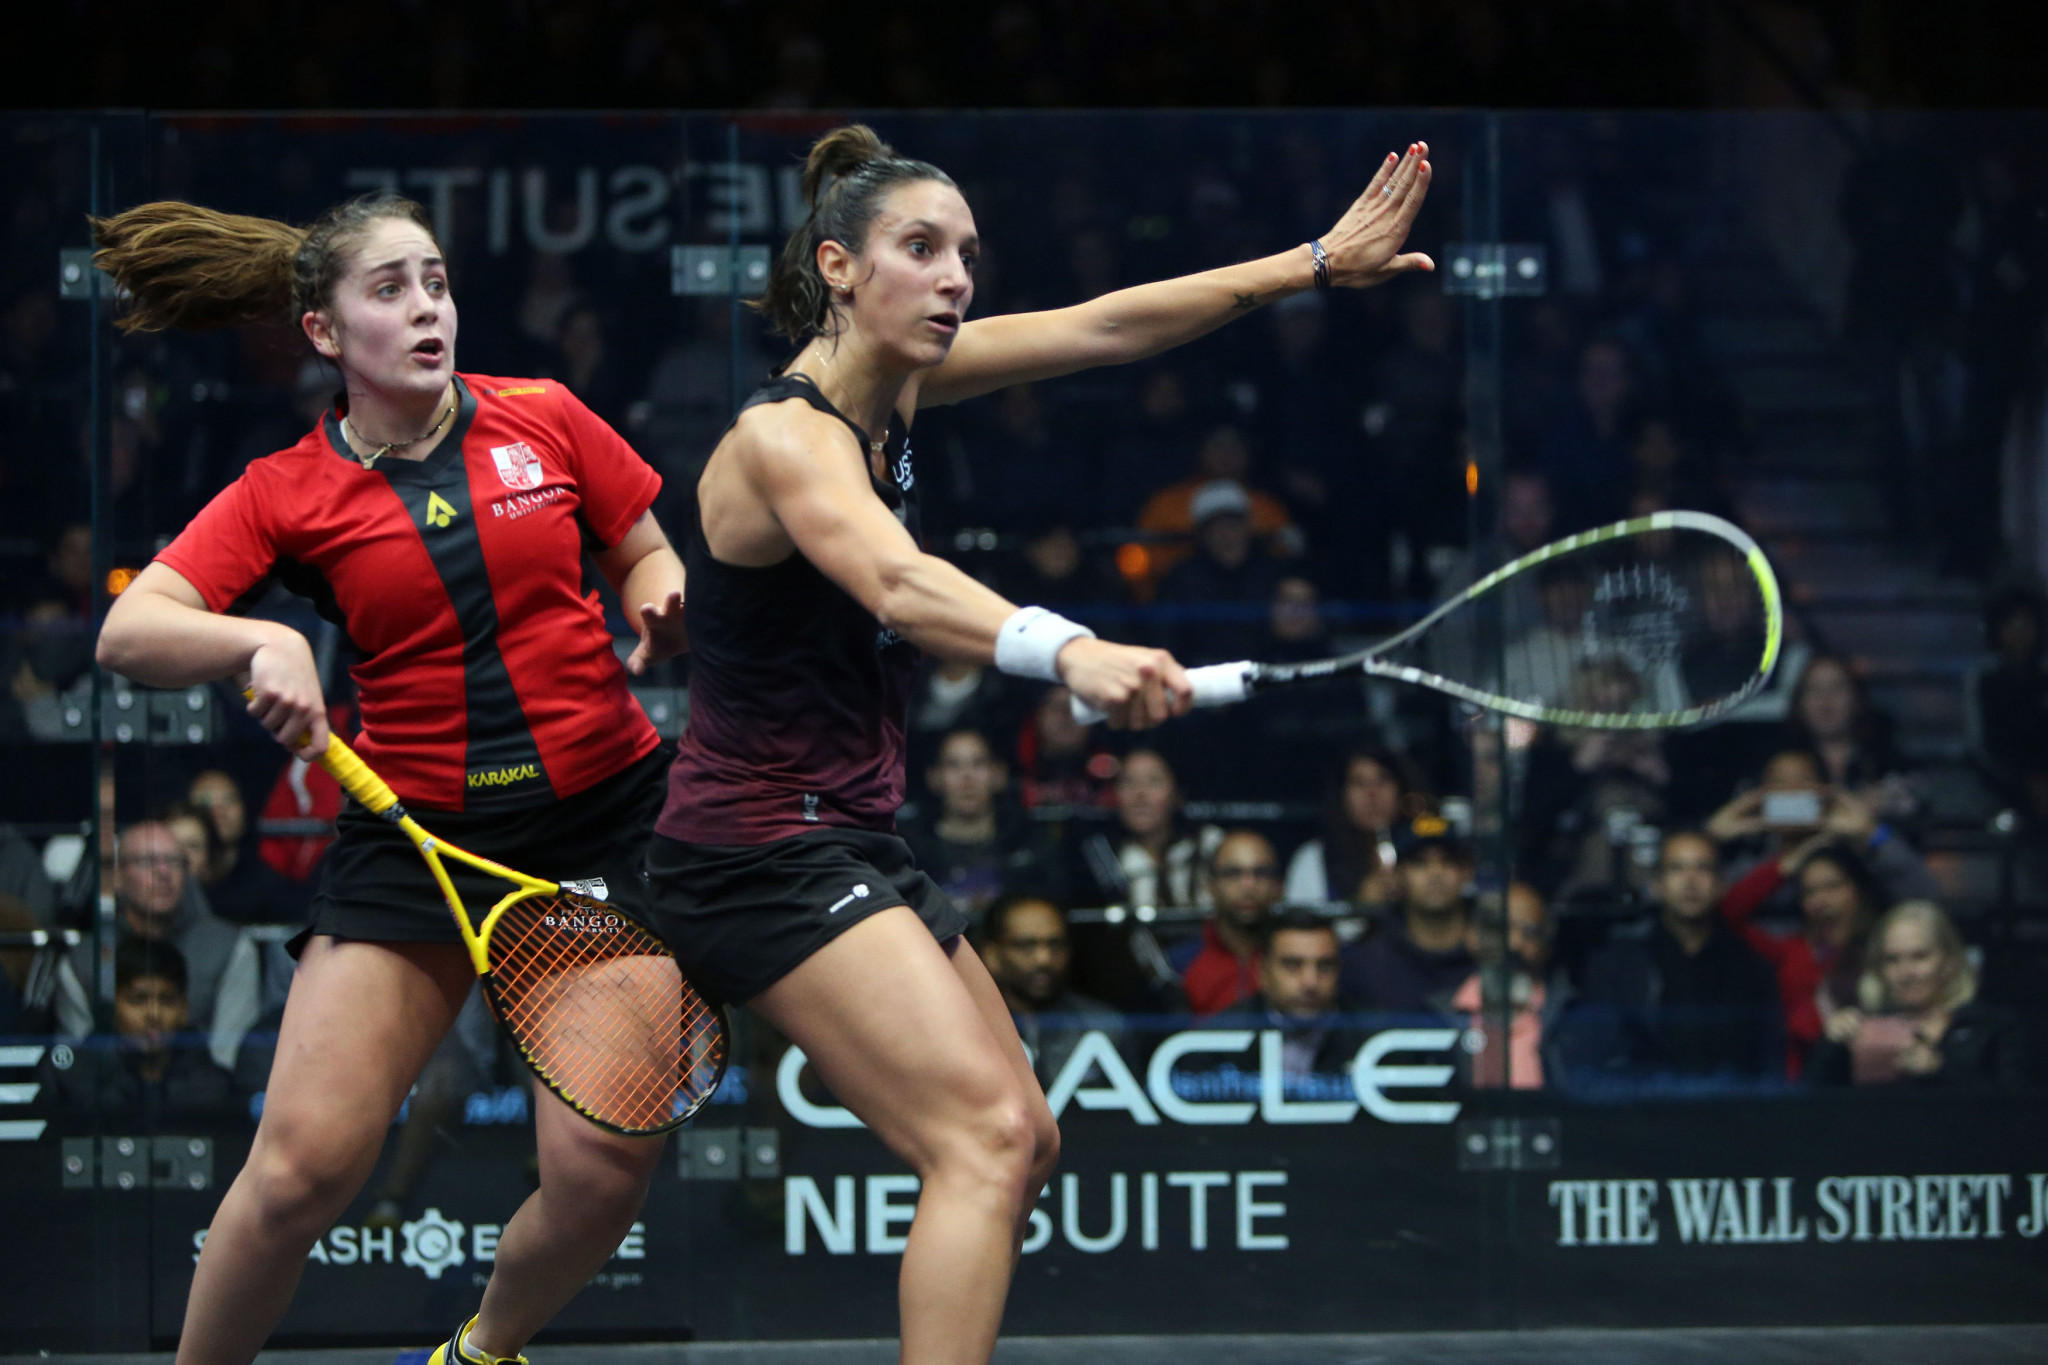 In the women’s draw, Camille Serme got the better of world number nine Tesni Evans to reach the last four ©PSA